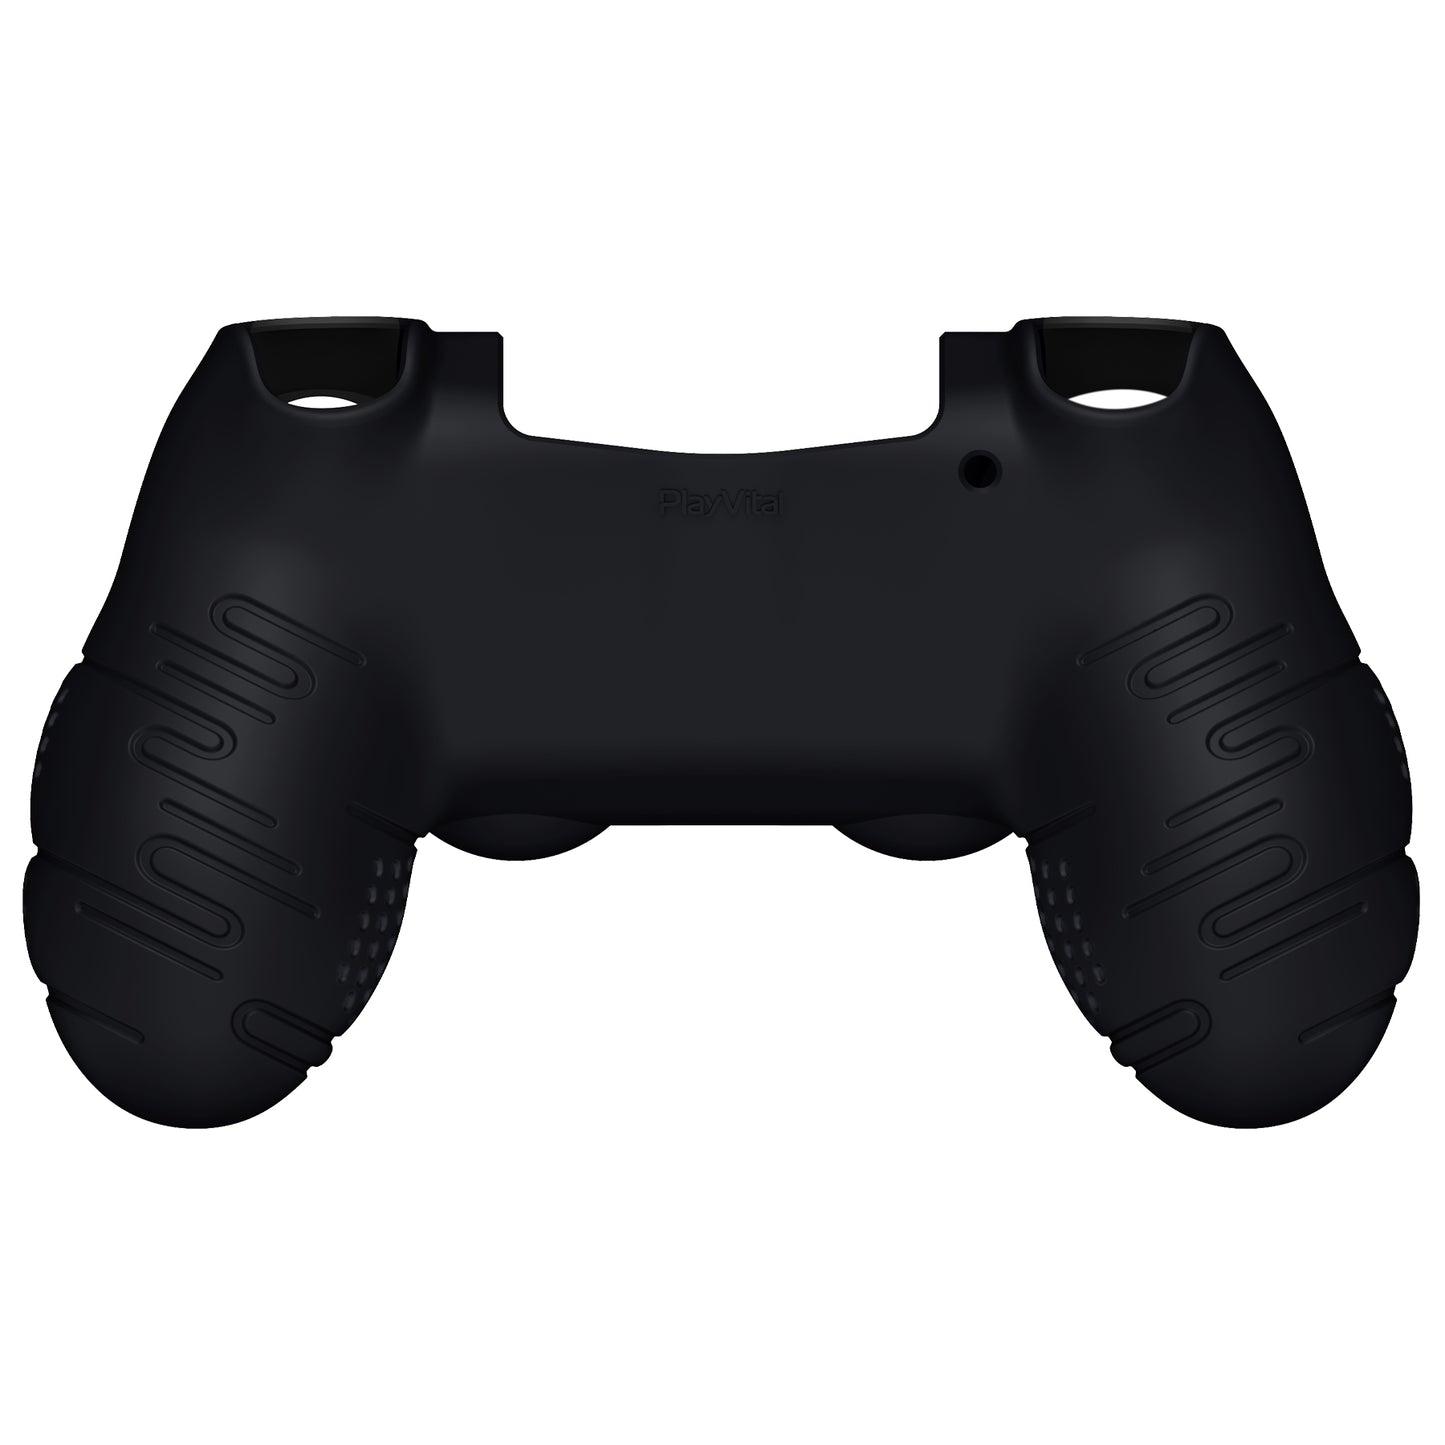 PlayVital Line & Dot Silicone Cover Skin with Thumb Grip Caps for PS4 Slim Pro Controller - Black - CLRP4P001